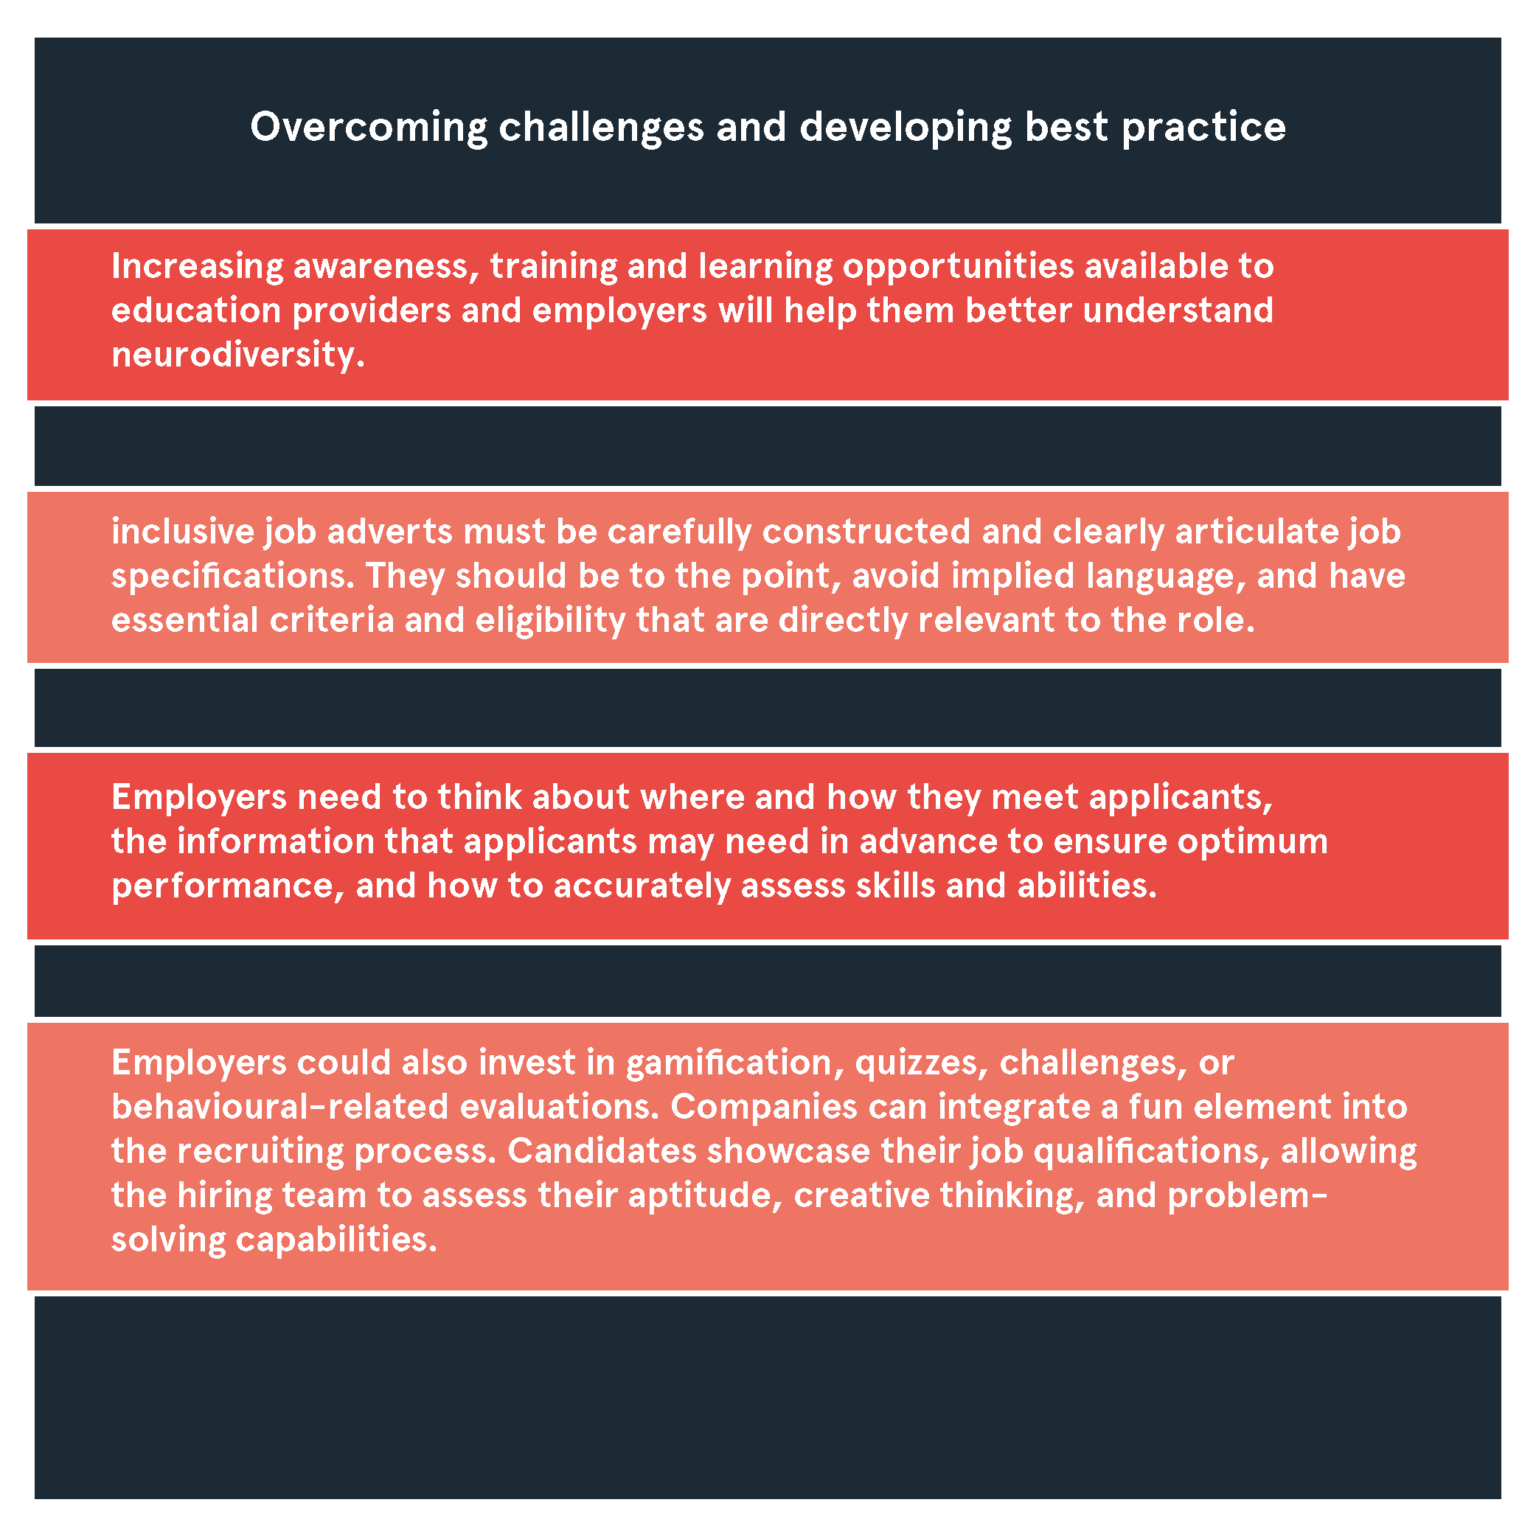 Overcoming challenges and developing best practice